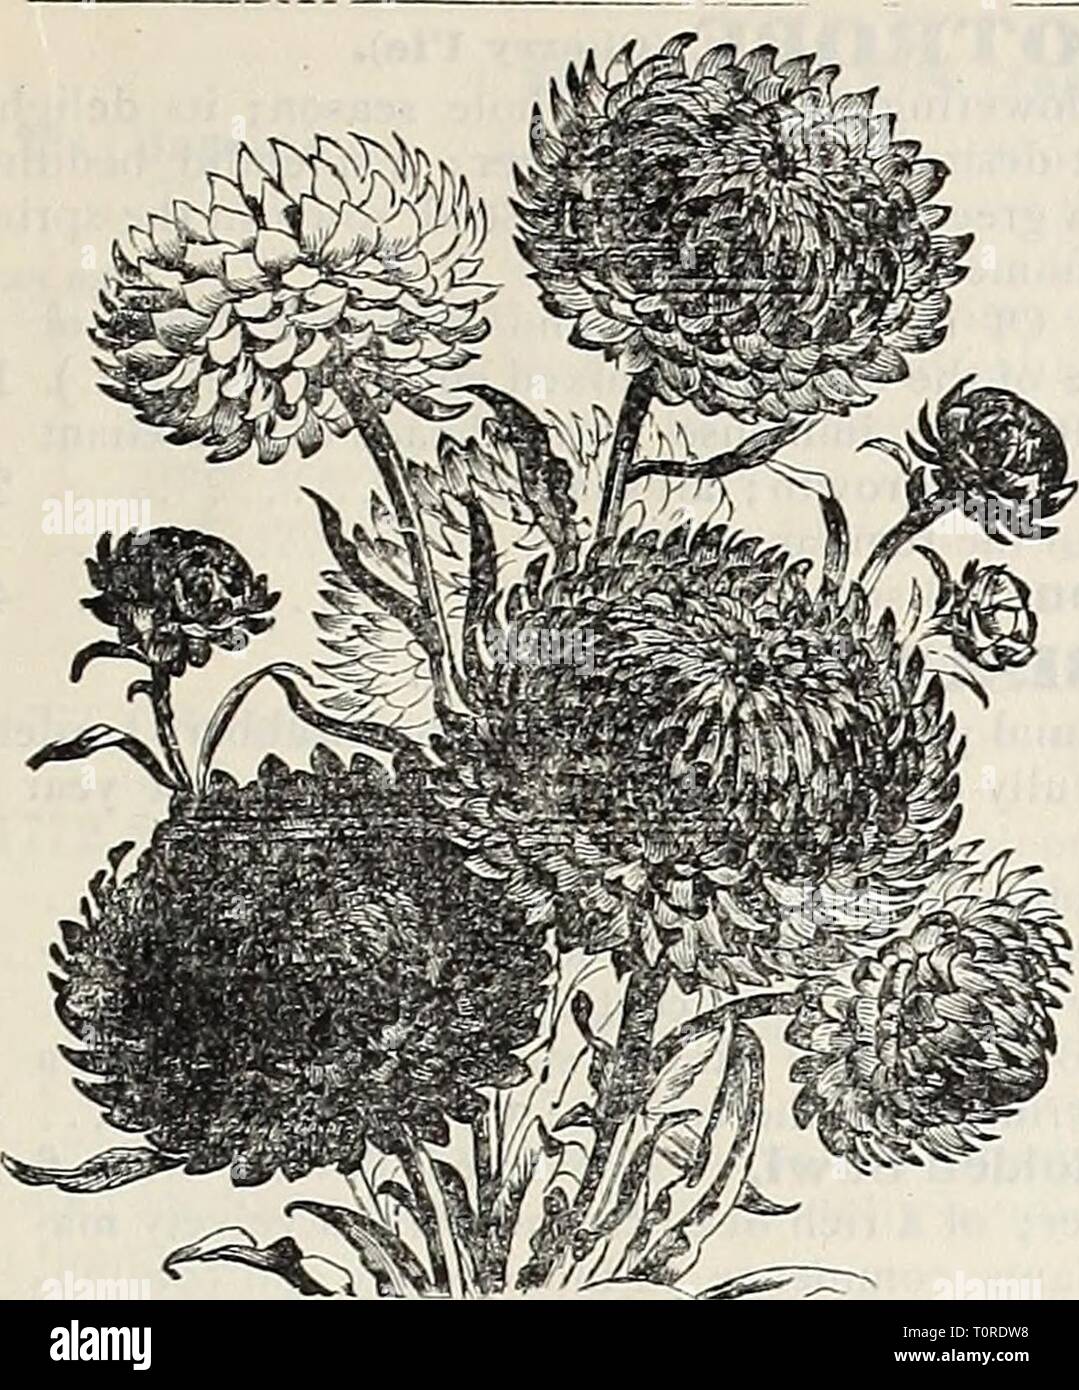 Dreer's 1907 garden book (1907) Dreer's 1907 garden book  dreers1907garden1907henr Year: 1907  f? lUfflOTADRffiâ IHIIADBPH!A--PA'BÂ» RELIABLE FLOWER SEEDS 79    HELIANTHUS (Sunflower). Remarkable for the stately growth, size and brilliancy of their flowers, making a veiy good effect among shrubbery and for screens. Single Sunflowers. The single Sunflowers are indispensable for cutting. Sown on a sunny spot in April or Mav they come inio bloom early in summer, and keep up a constant supply of flowers untd cut down by host. PER PKT. 2701 CucumeriiolillS {Miniature Sunflower'). Small, single rich Stock Photo